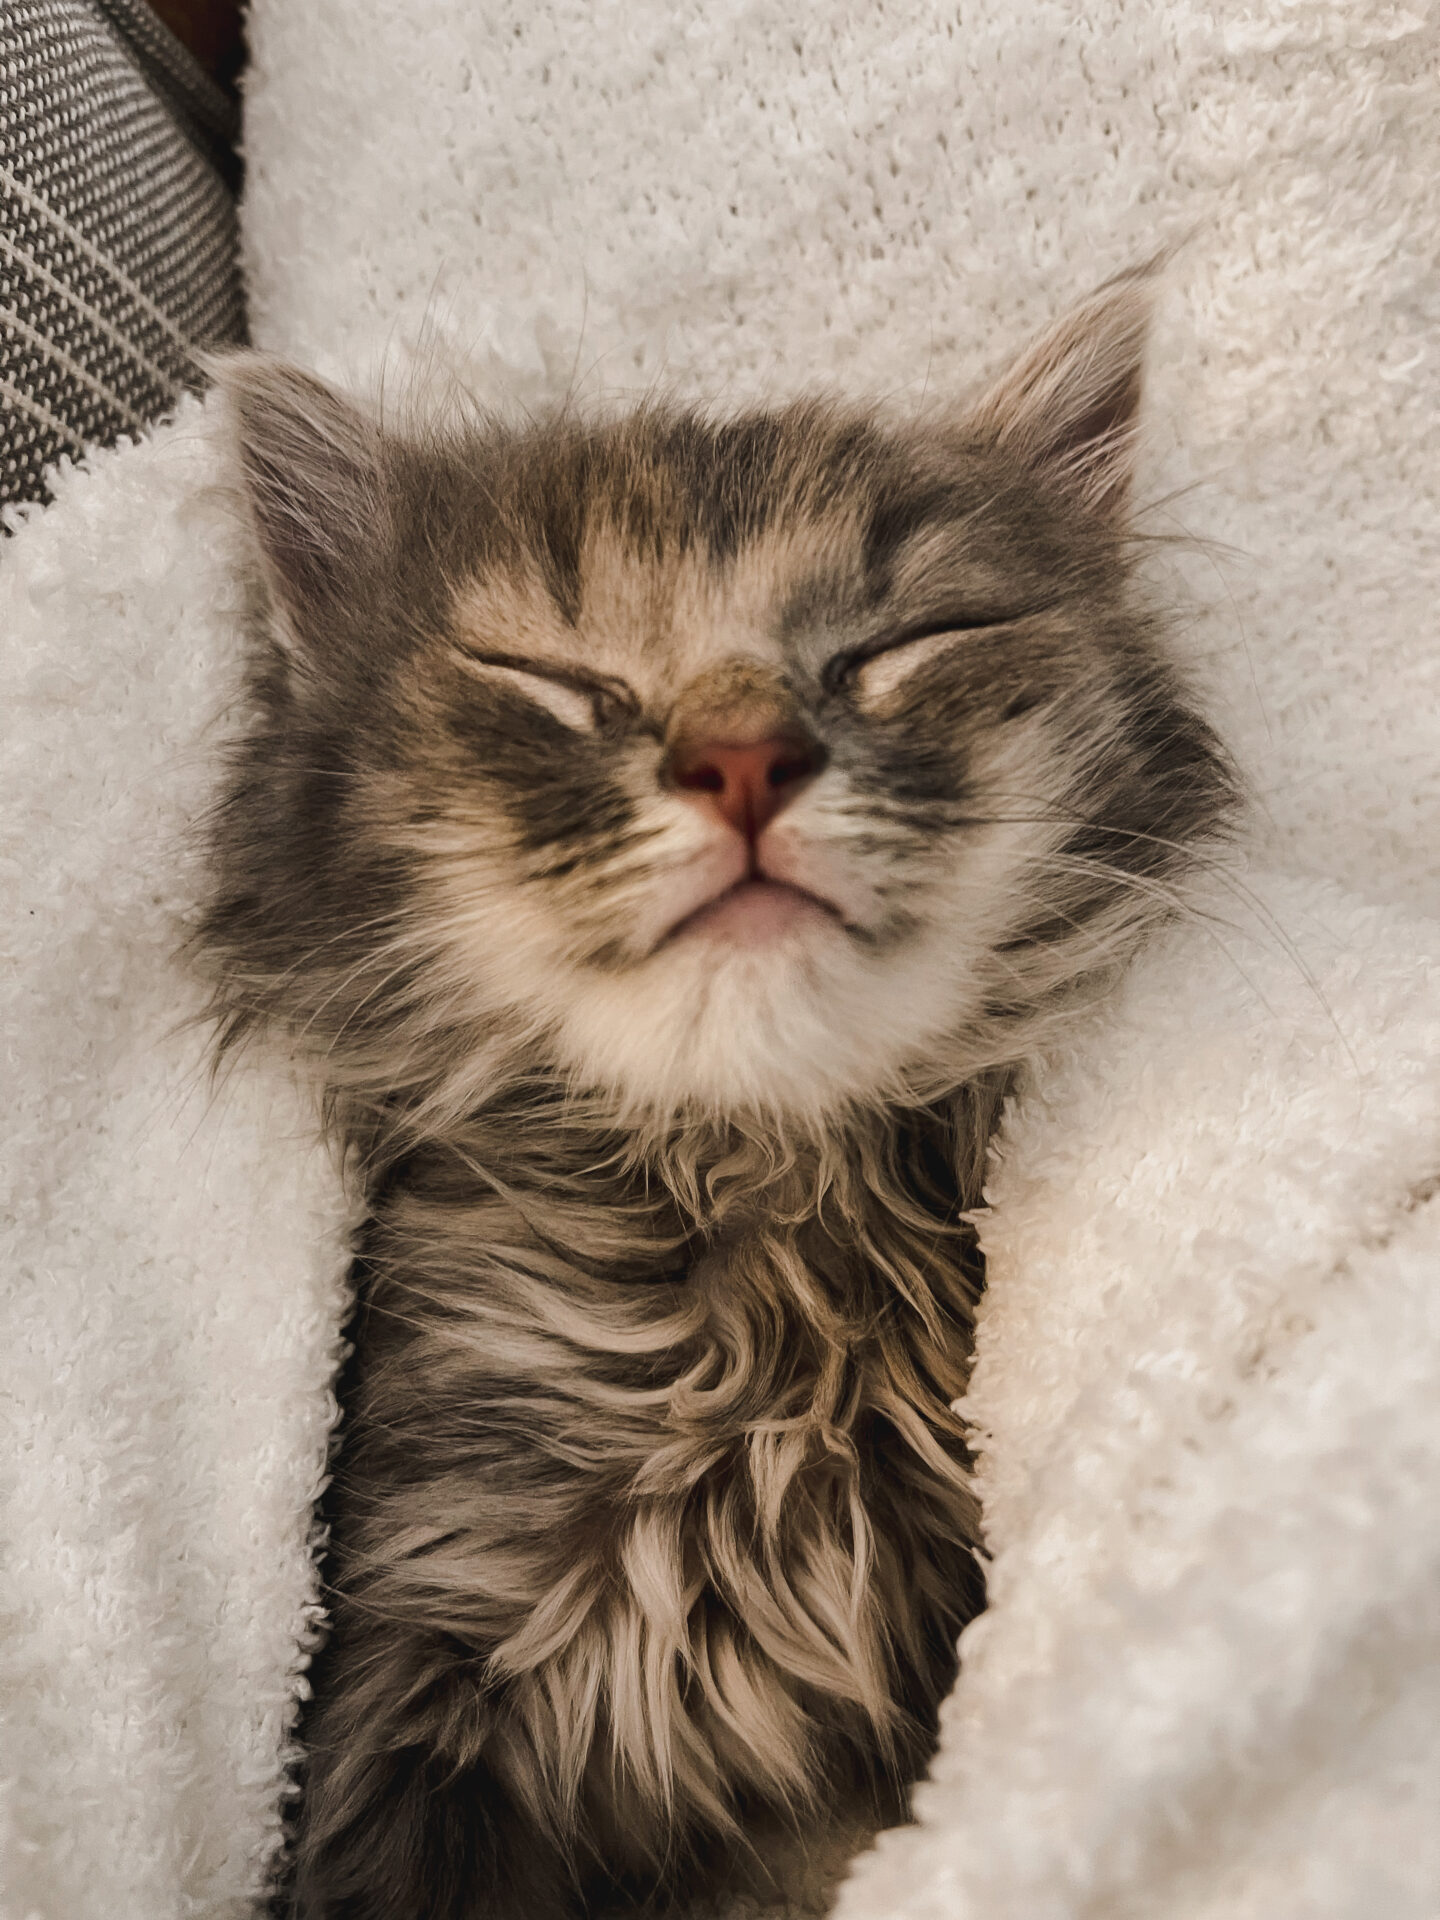 How to take care of a 4 week old kitten by Lifestyle Blogger Angela Lanter rescue foster adoption cat